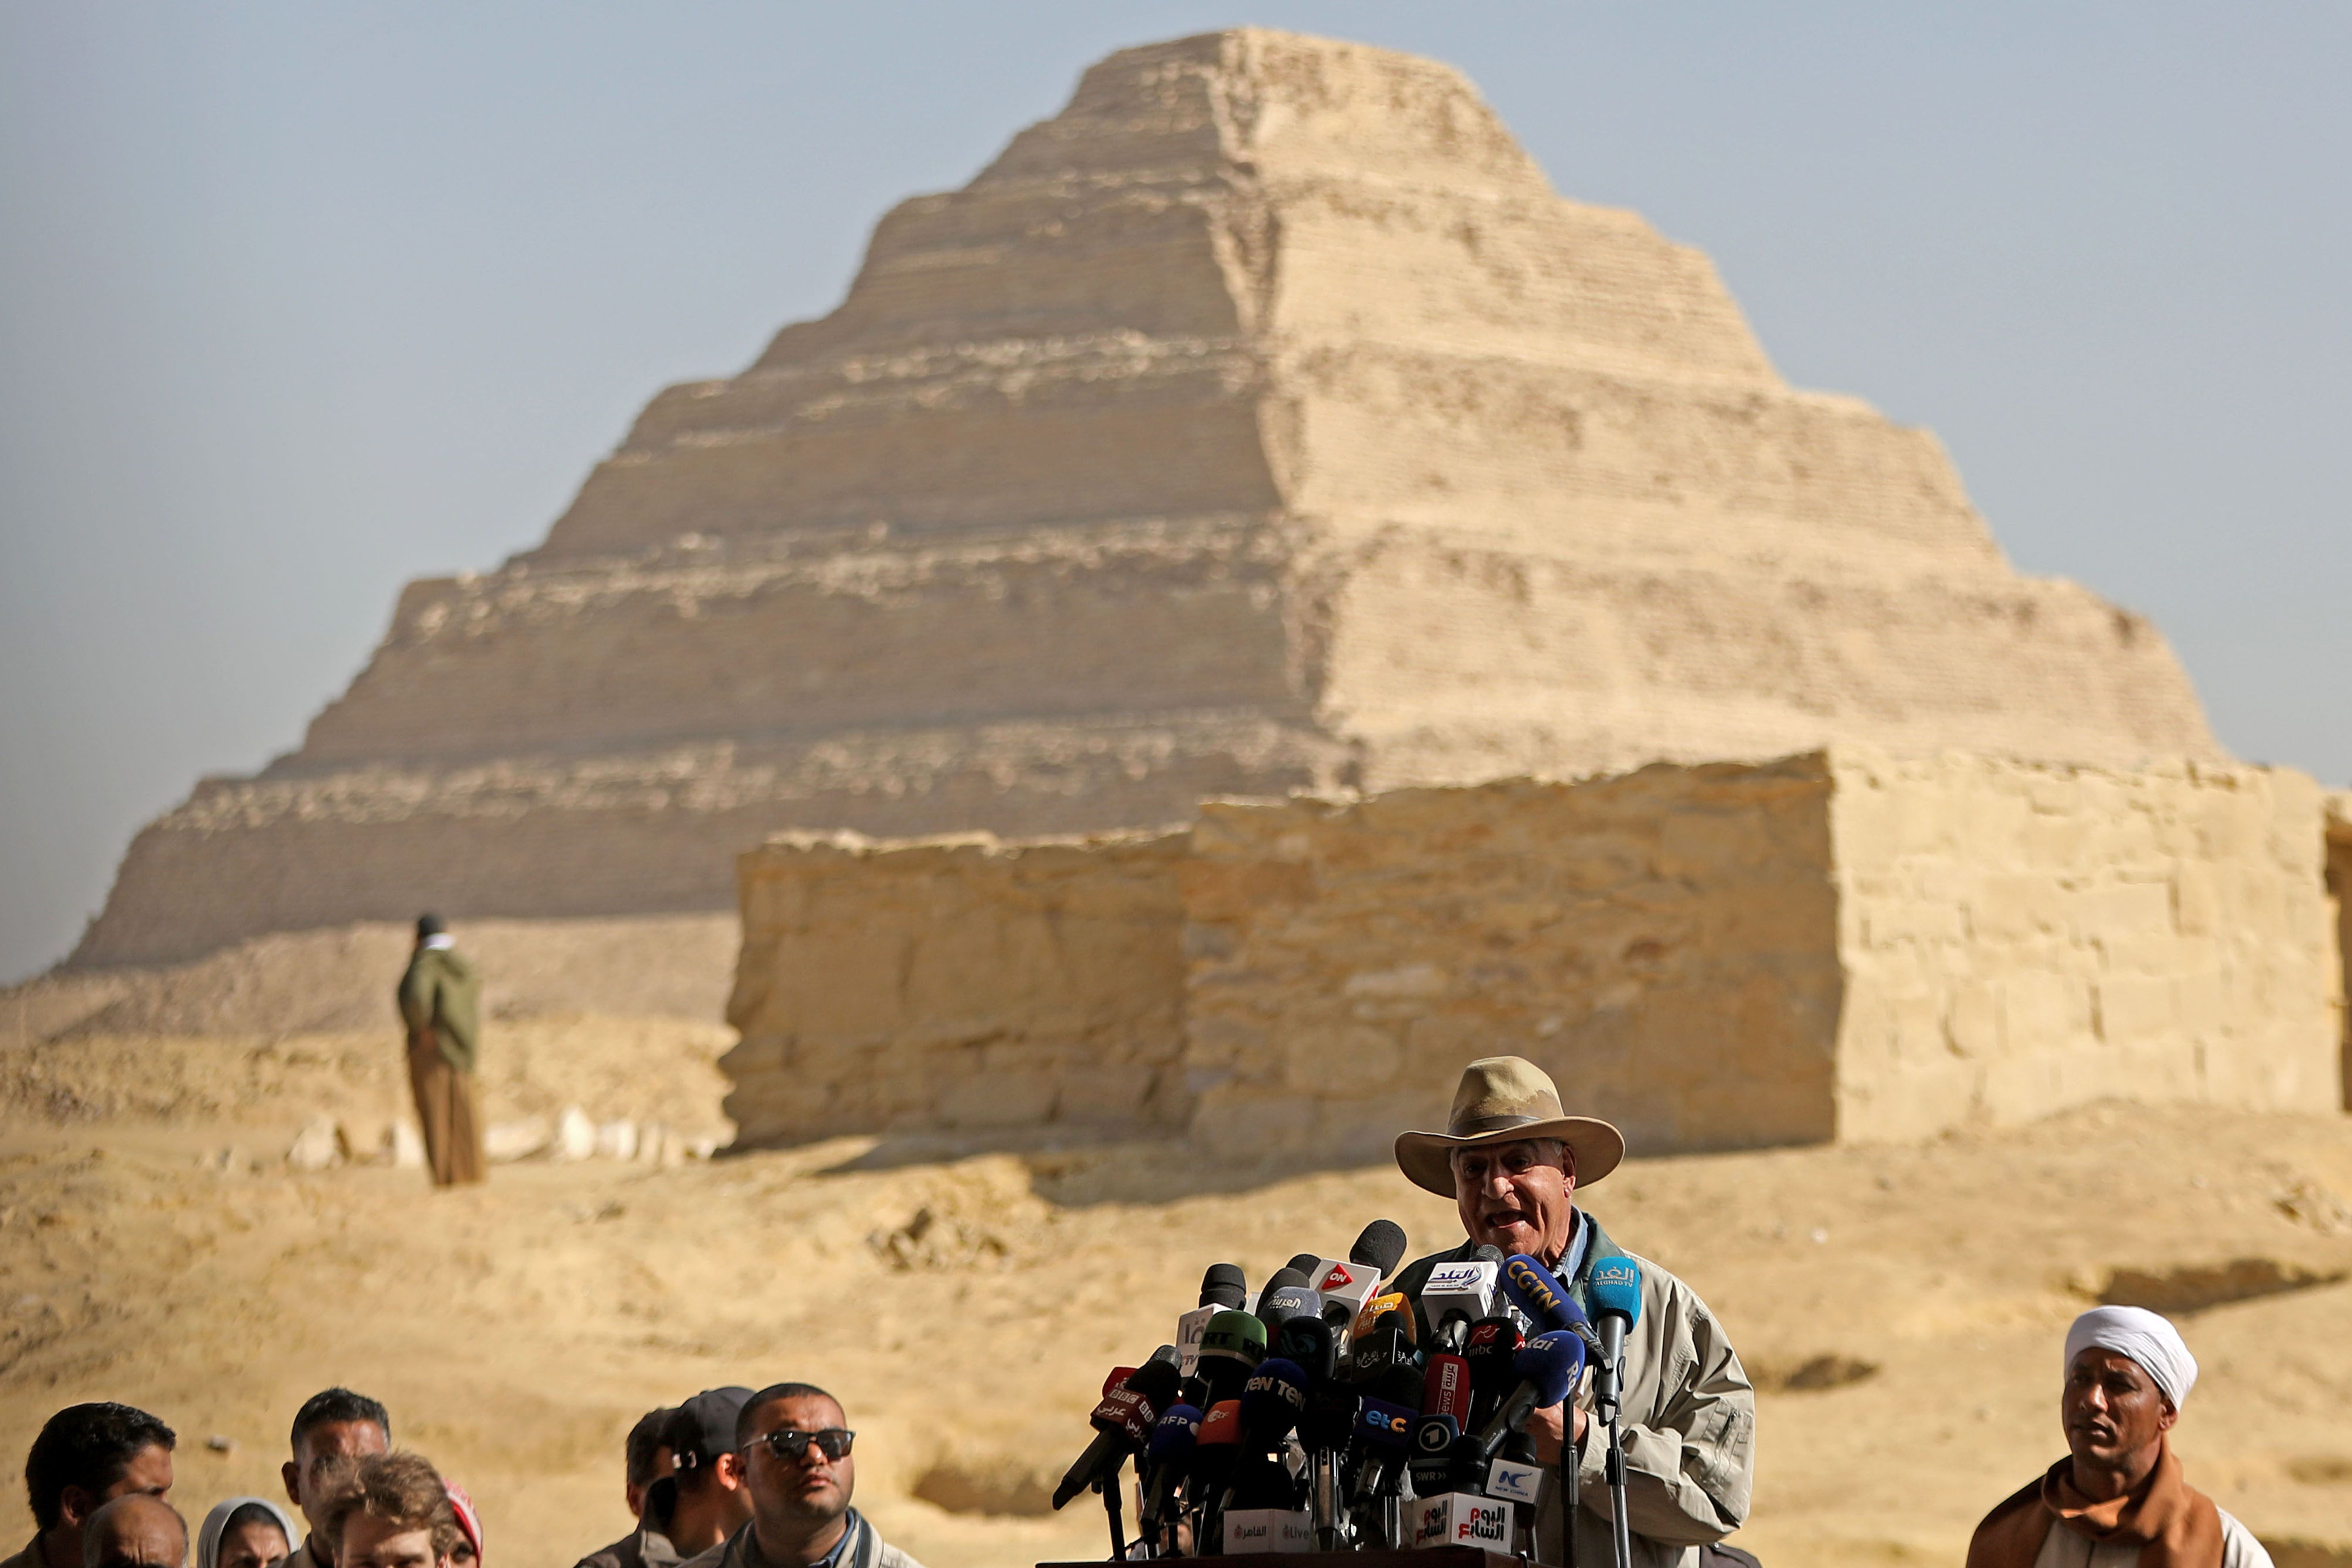 Egyptian archaeologist Zahi Hawass at a press conference to announce new discoveries at the Modir Bridge in Saqqara, on January 26